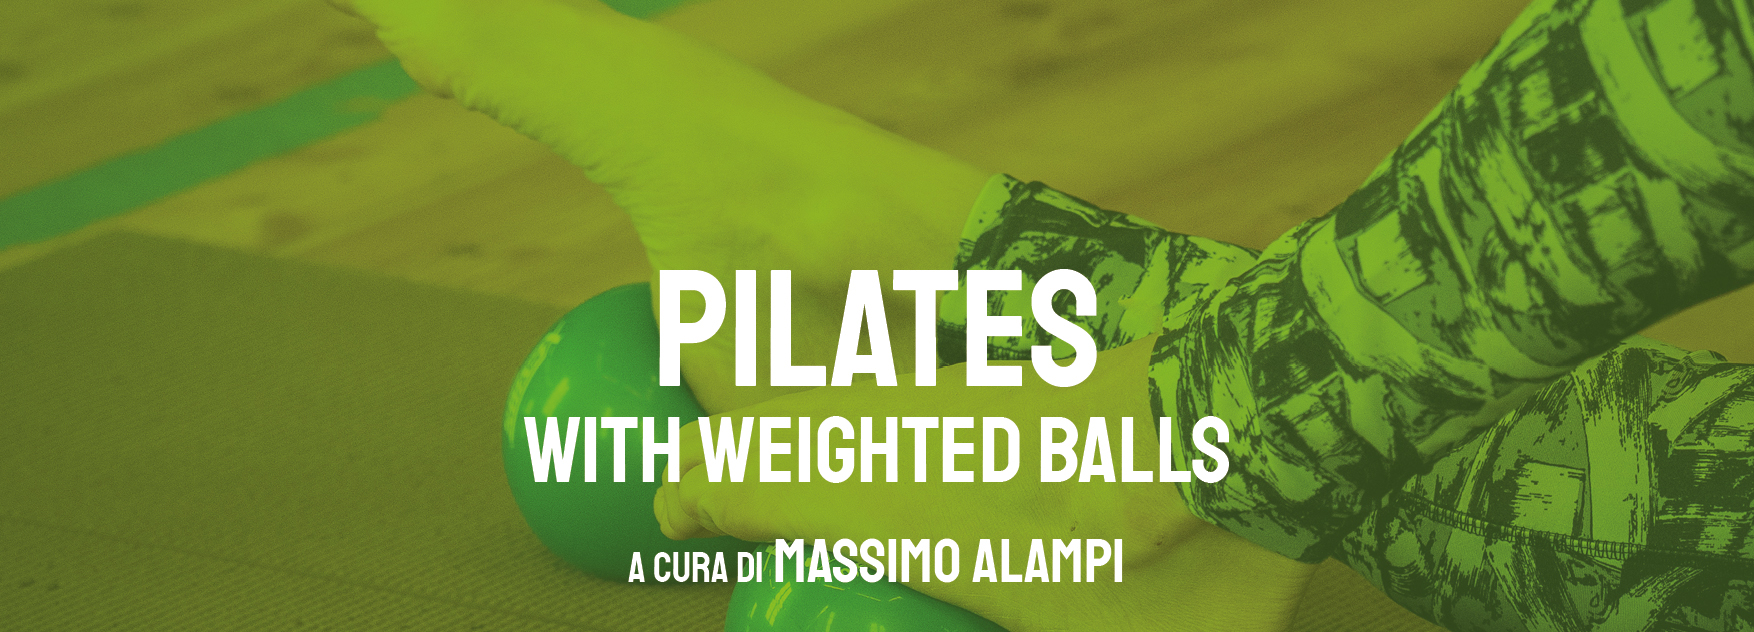 pilates weighted ball alampi